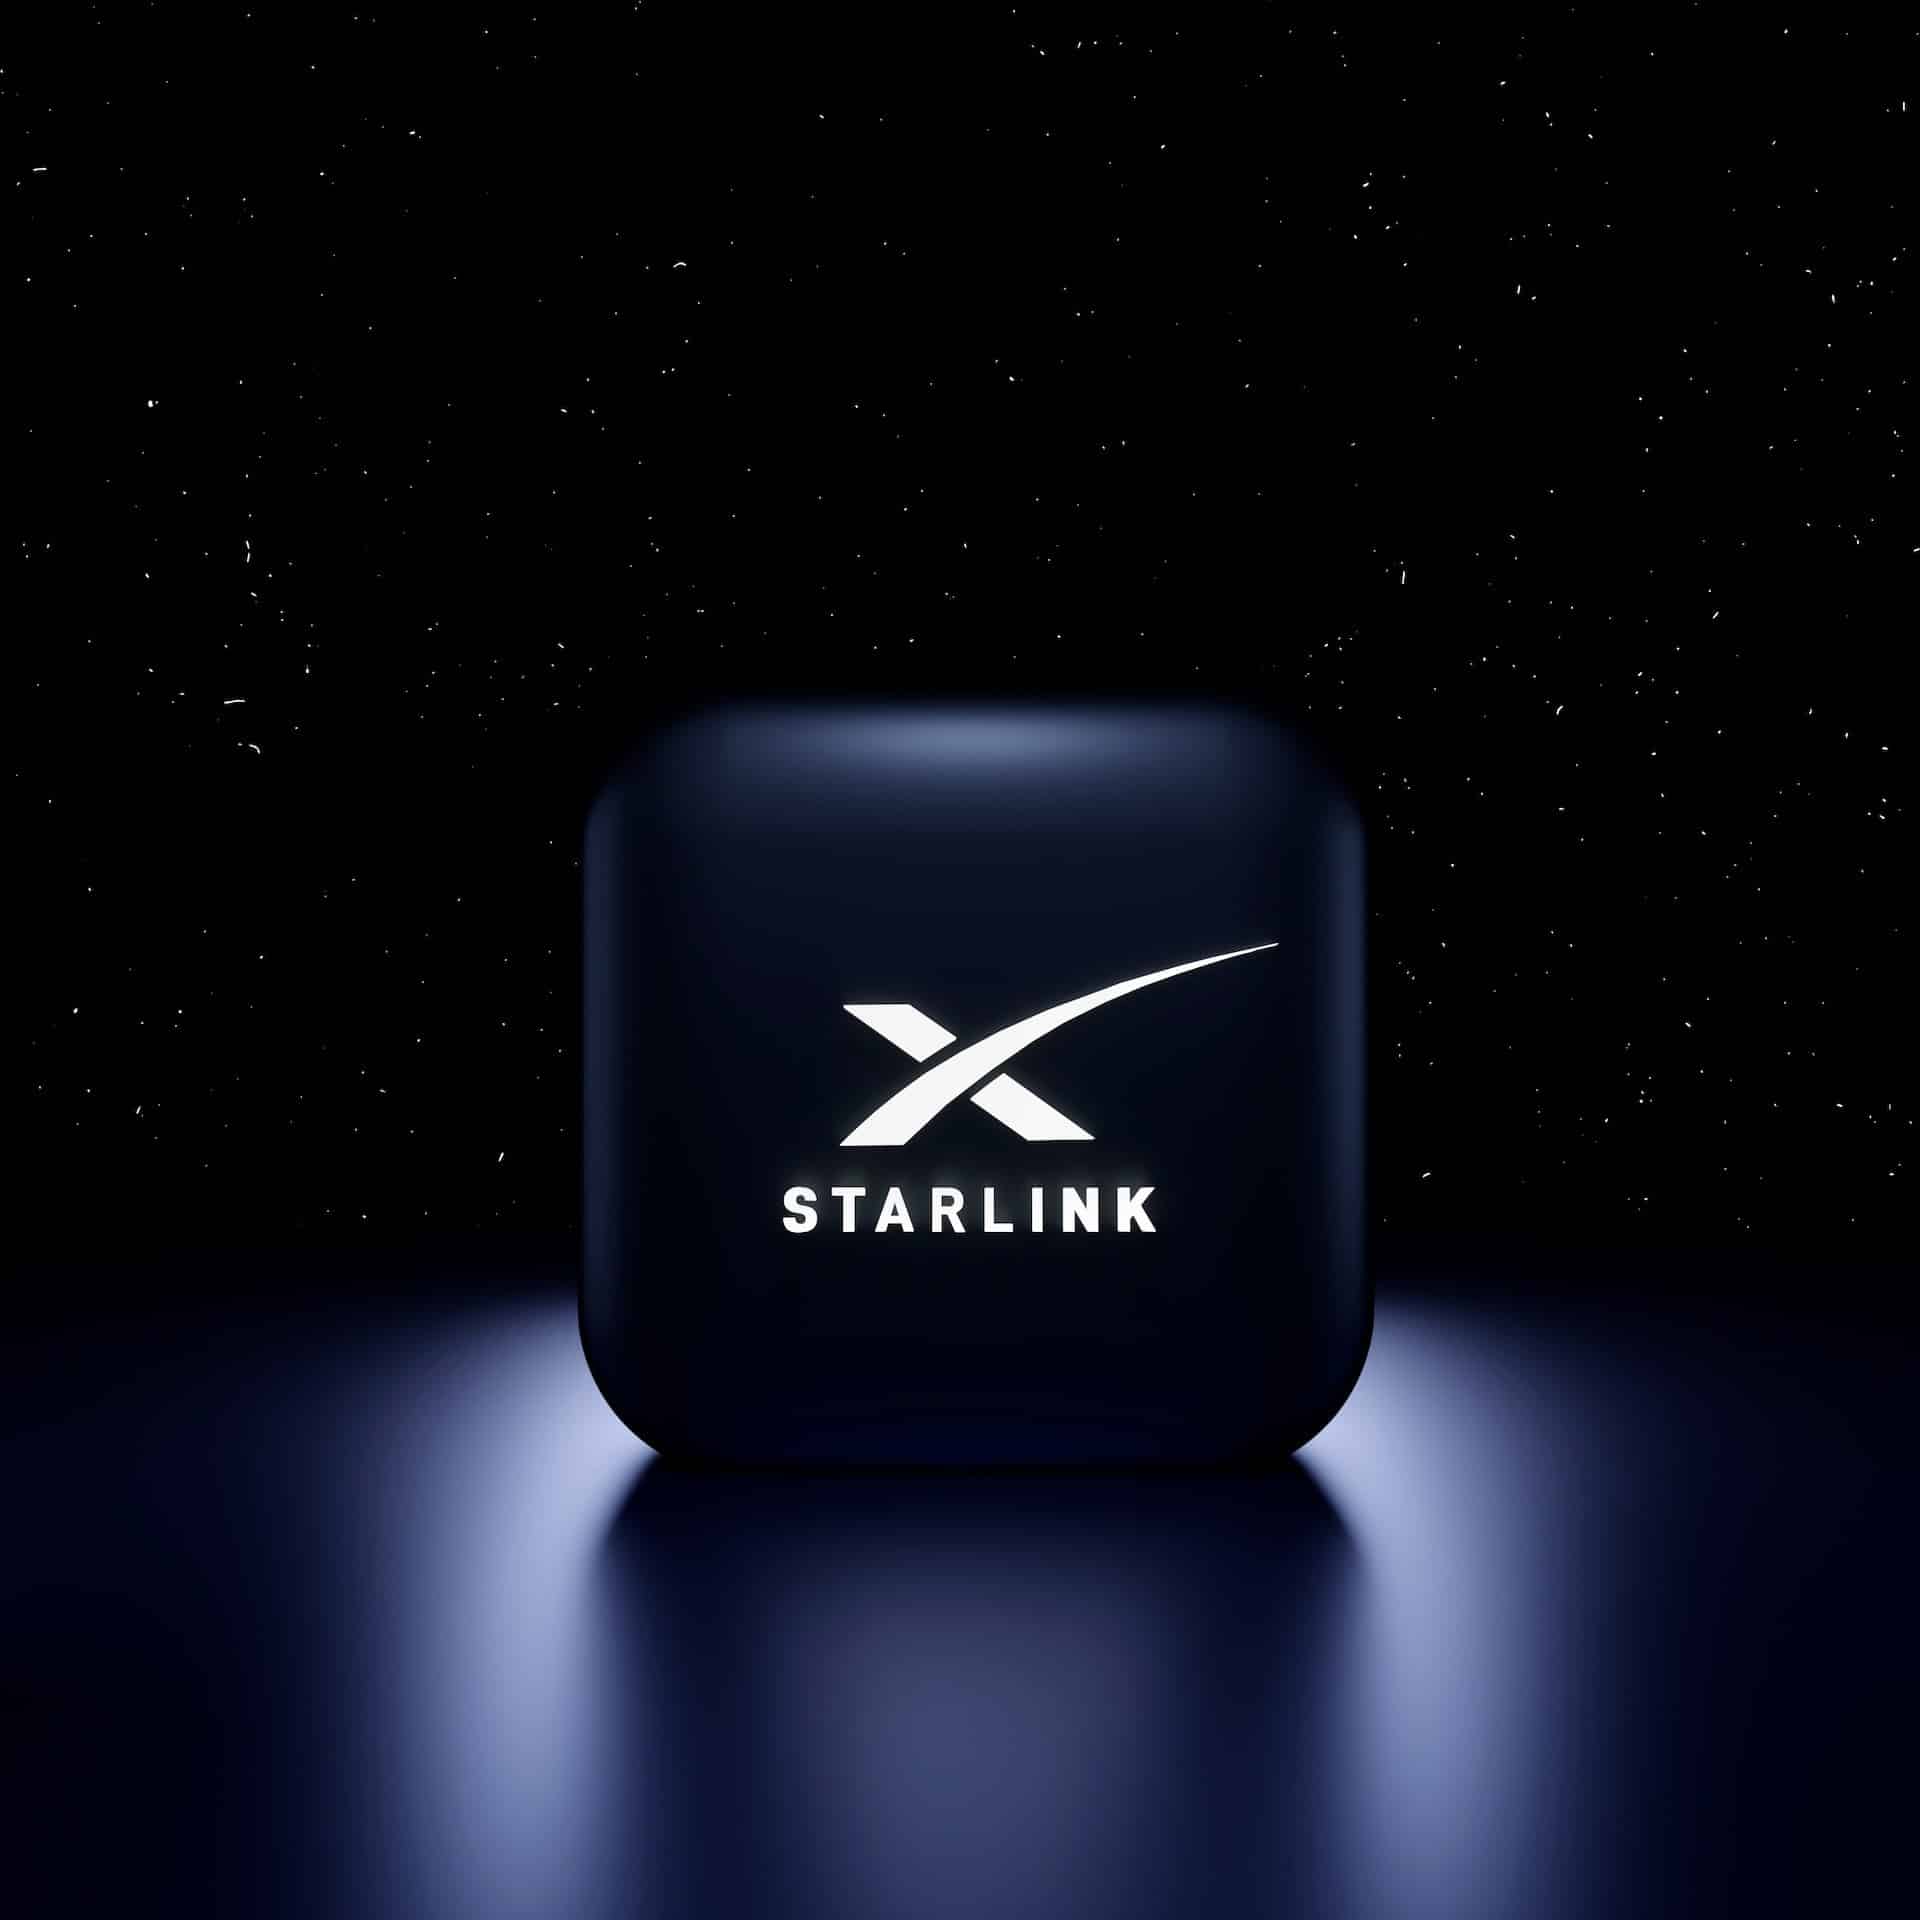 Starlink Competitors and Alternatives Featured image by Mariia Shalabaieva